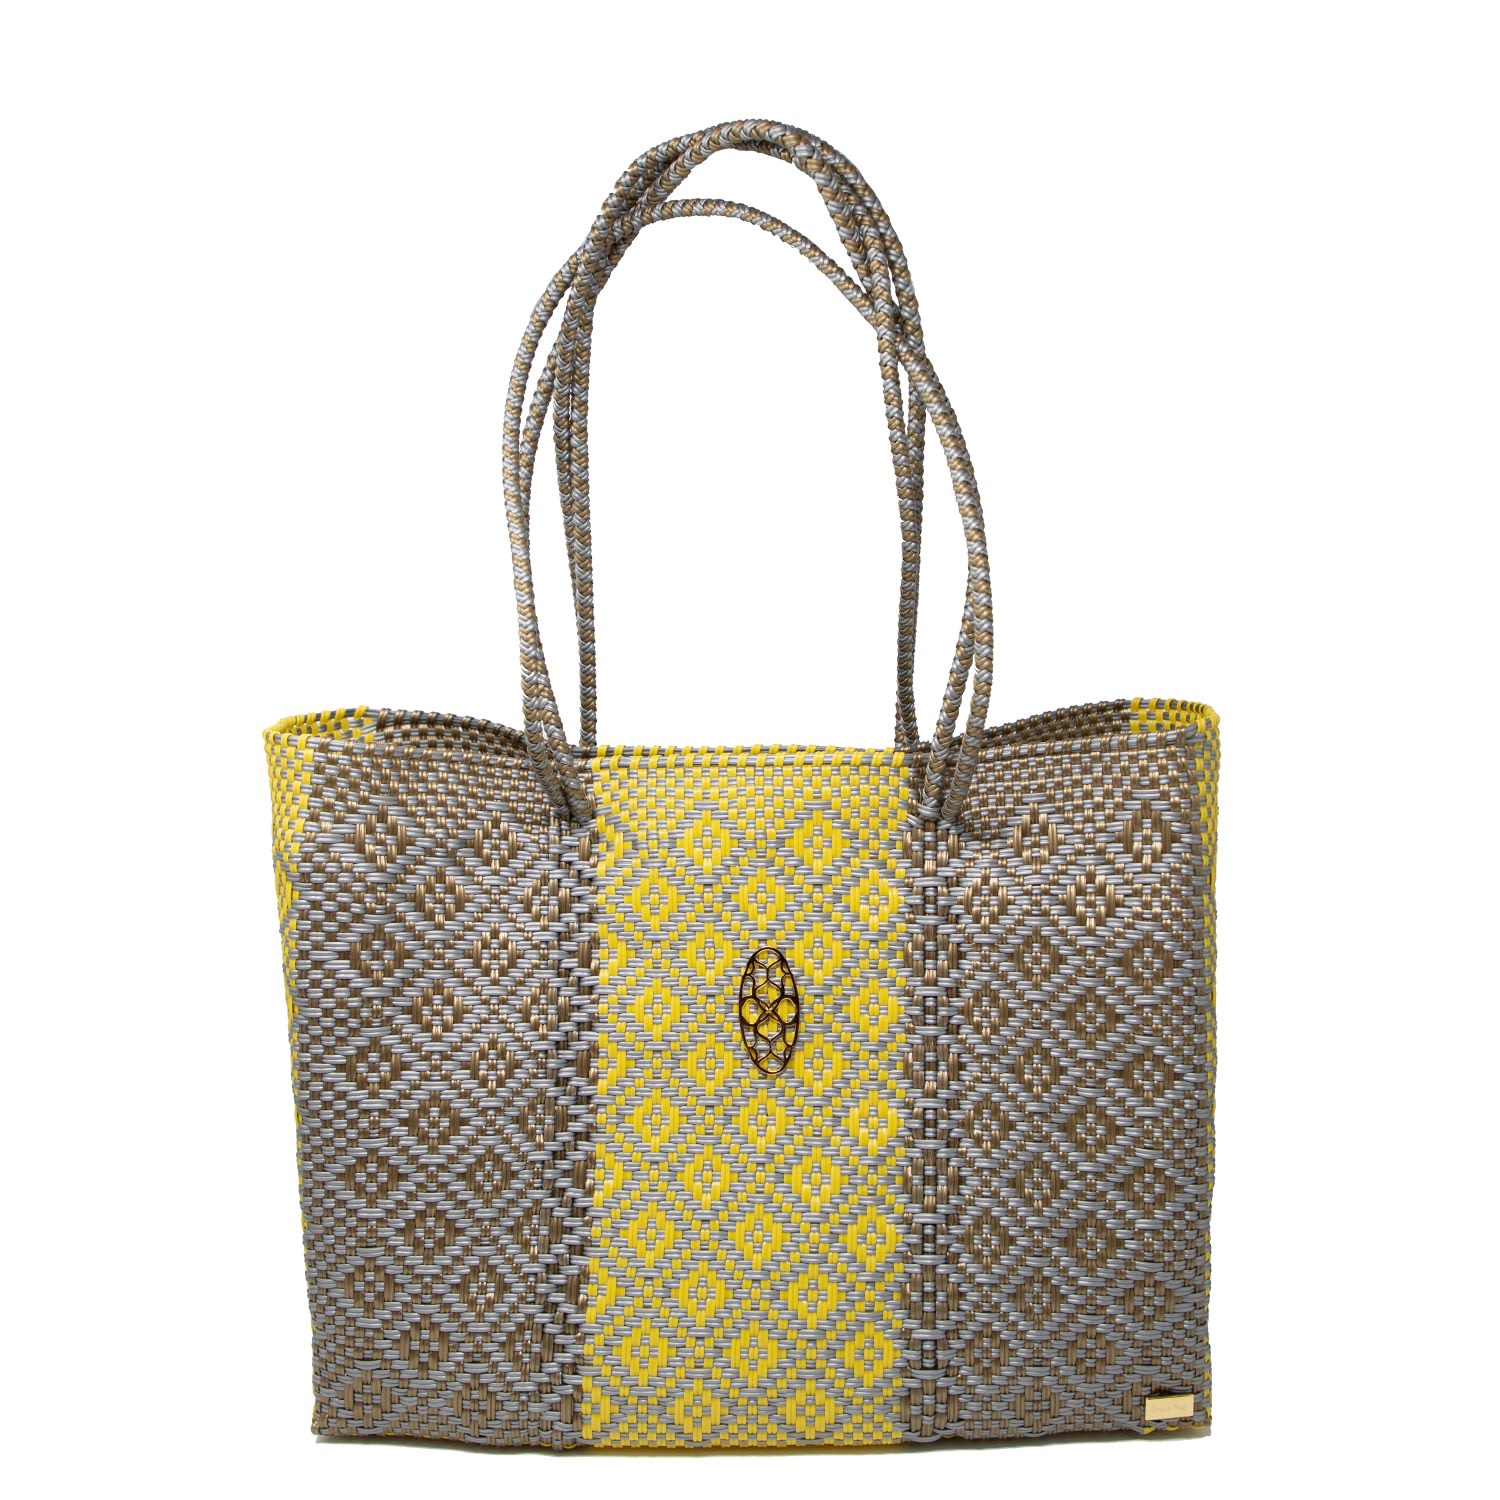 Women’s Gray/Yellow Travel Tote With Clutch Lolas Bag